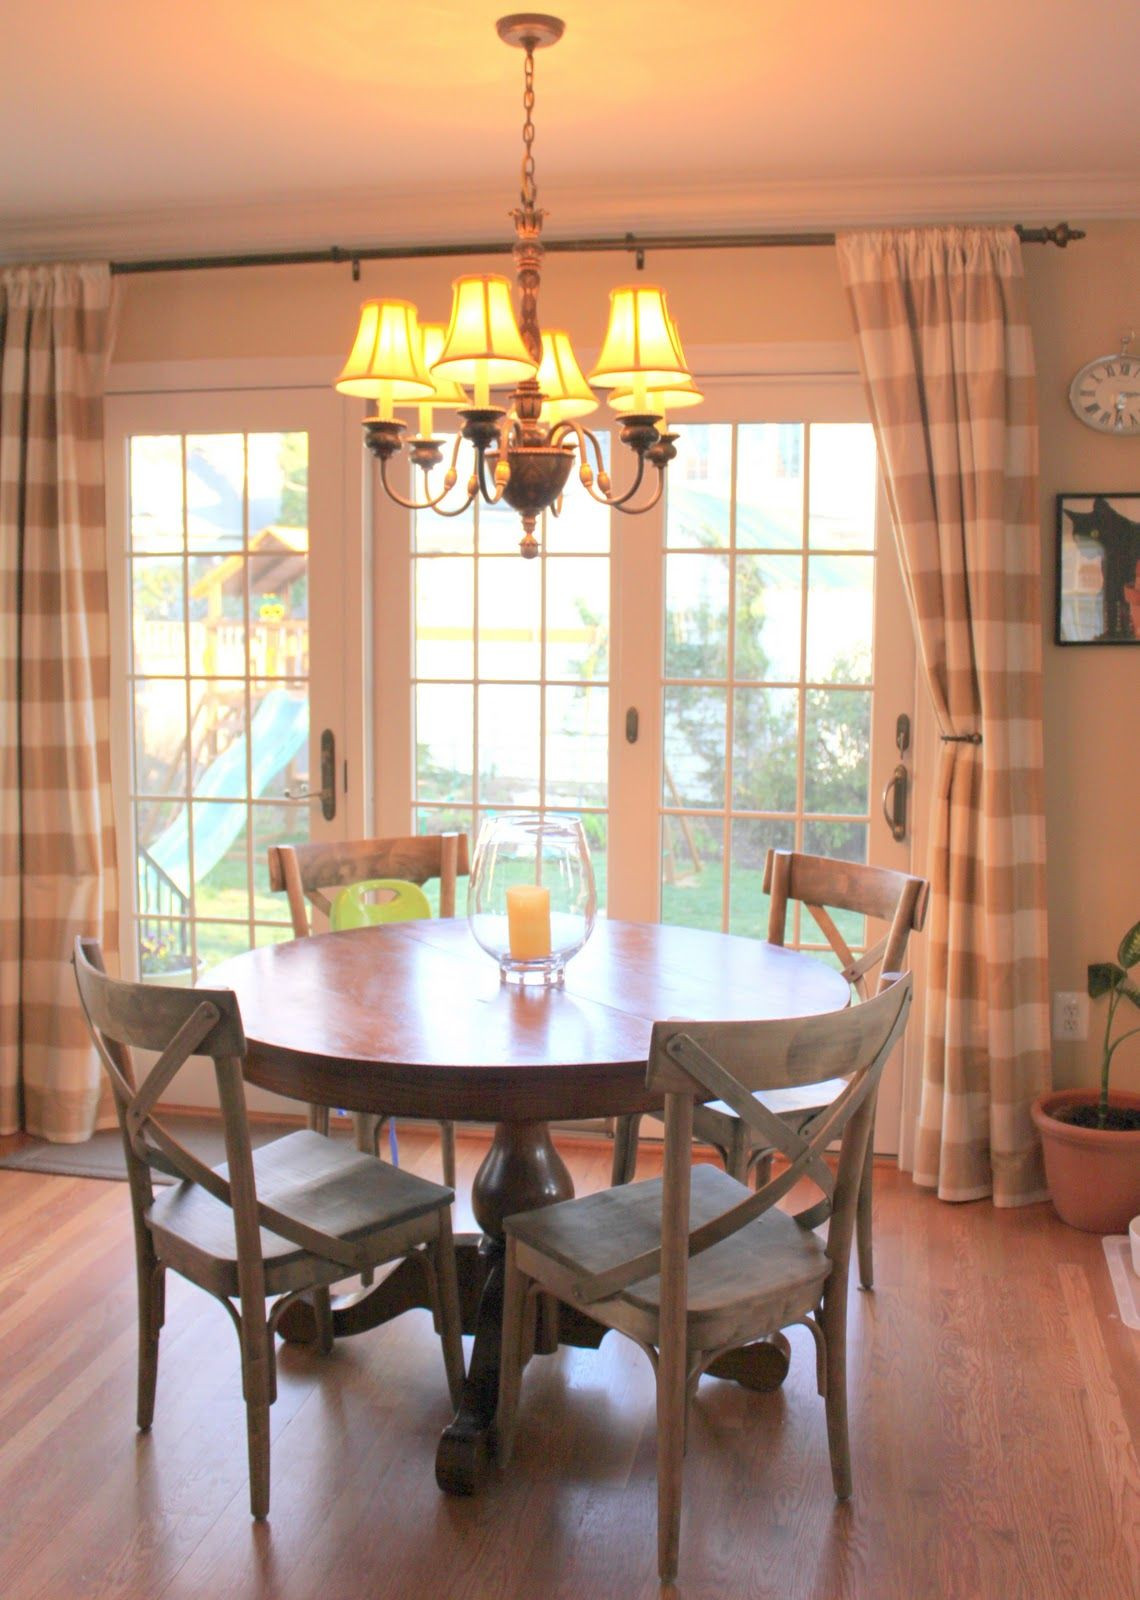 Kitchen Door Curtains
 sliding glass door curtain ideas love the country chairs